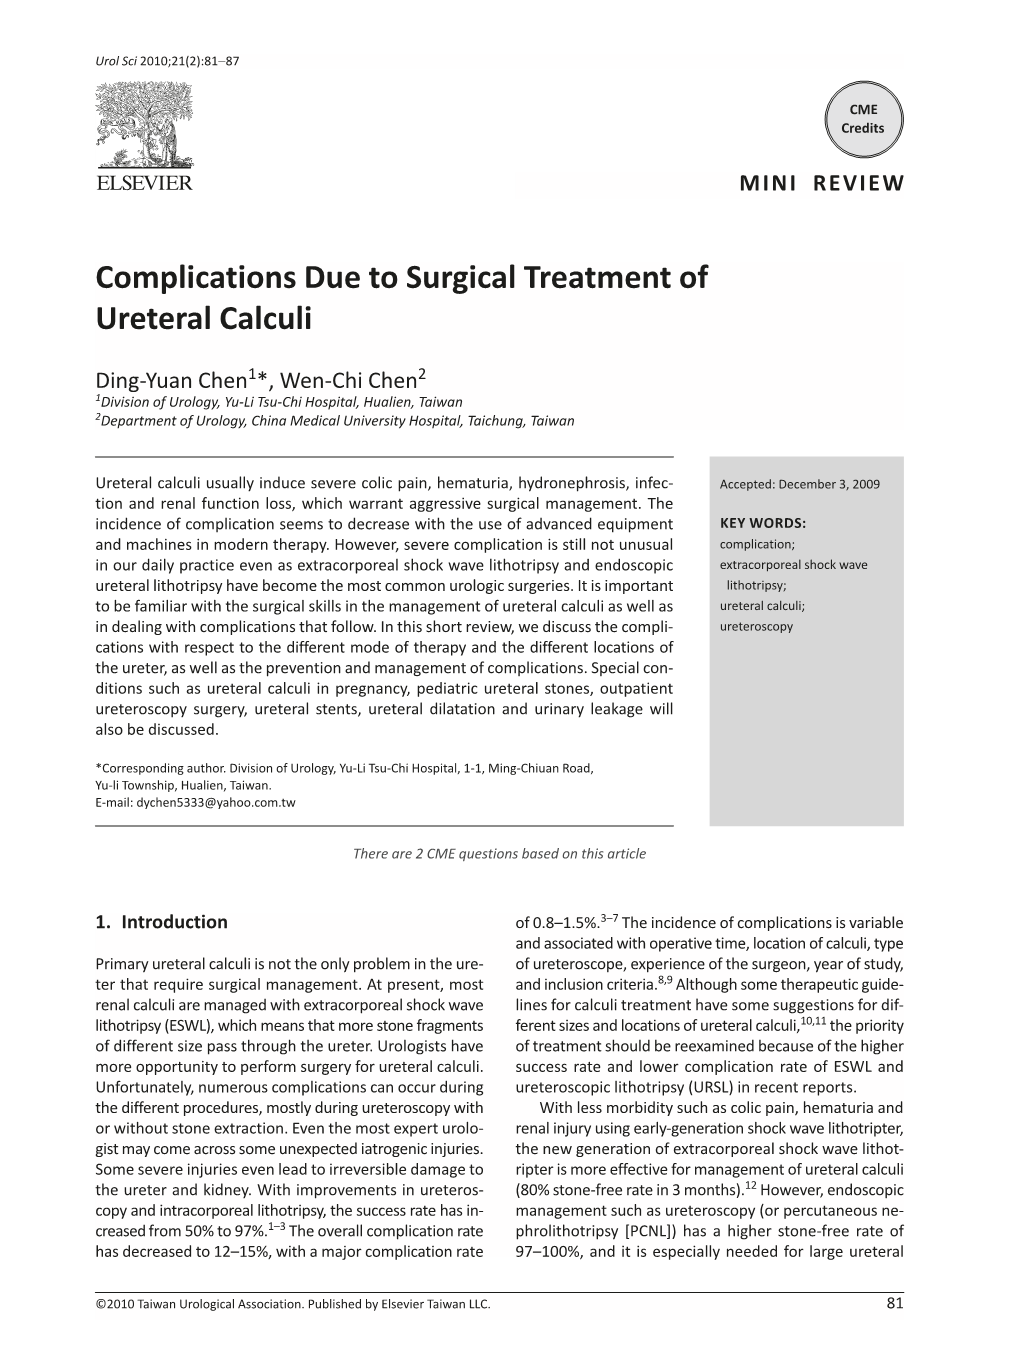 Complications Due to Surgical Treatment of Ureteral Calculi